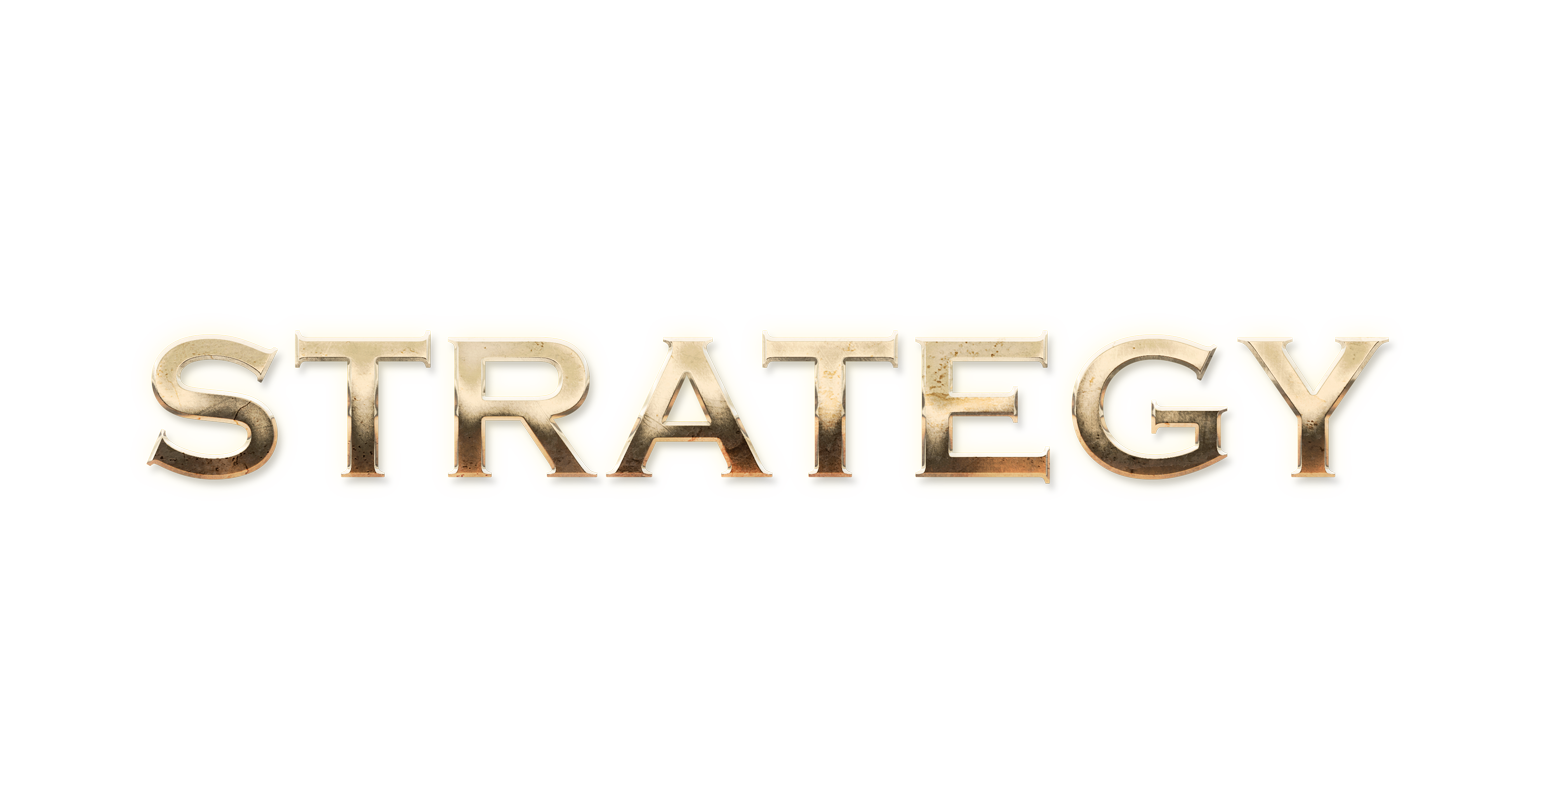 WORD STRATEGY gold text effects art typography PNG images free